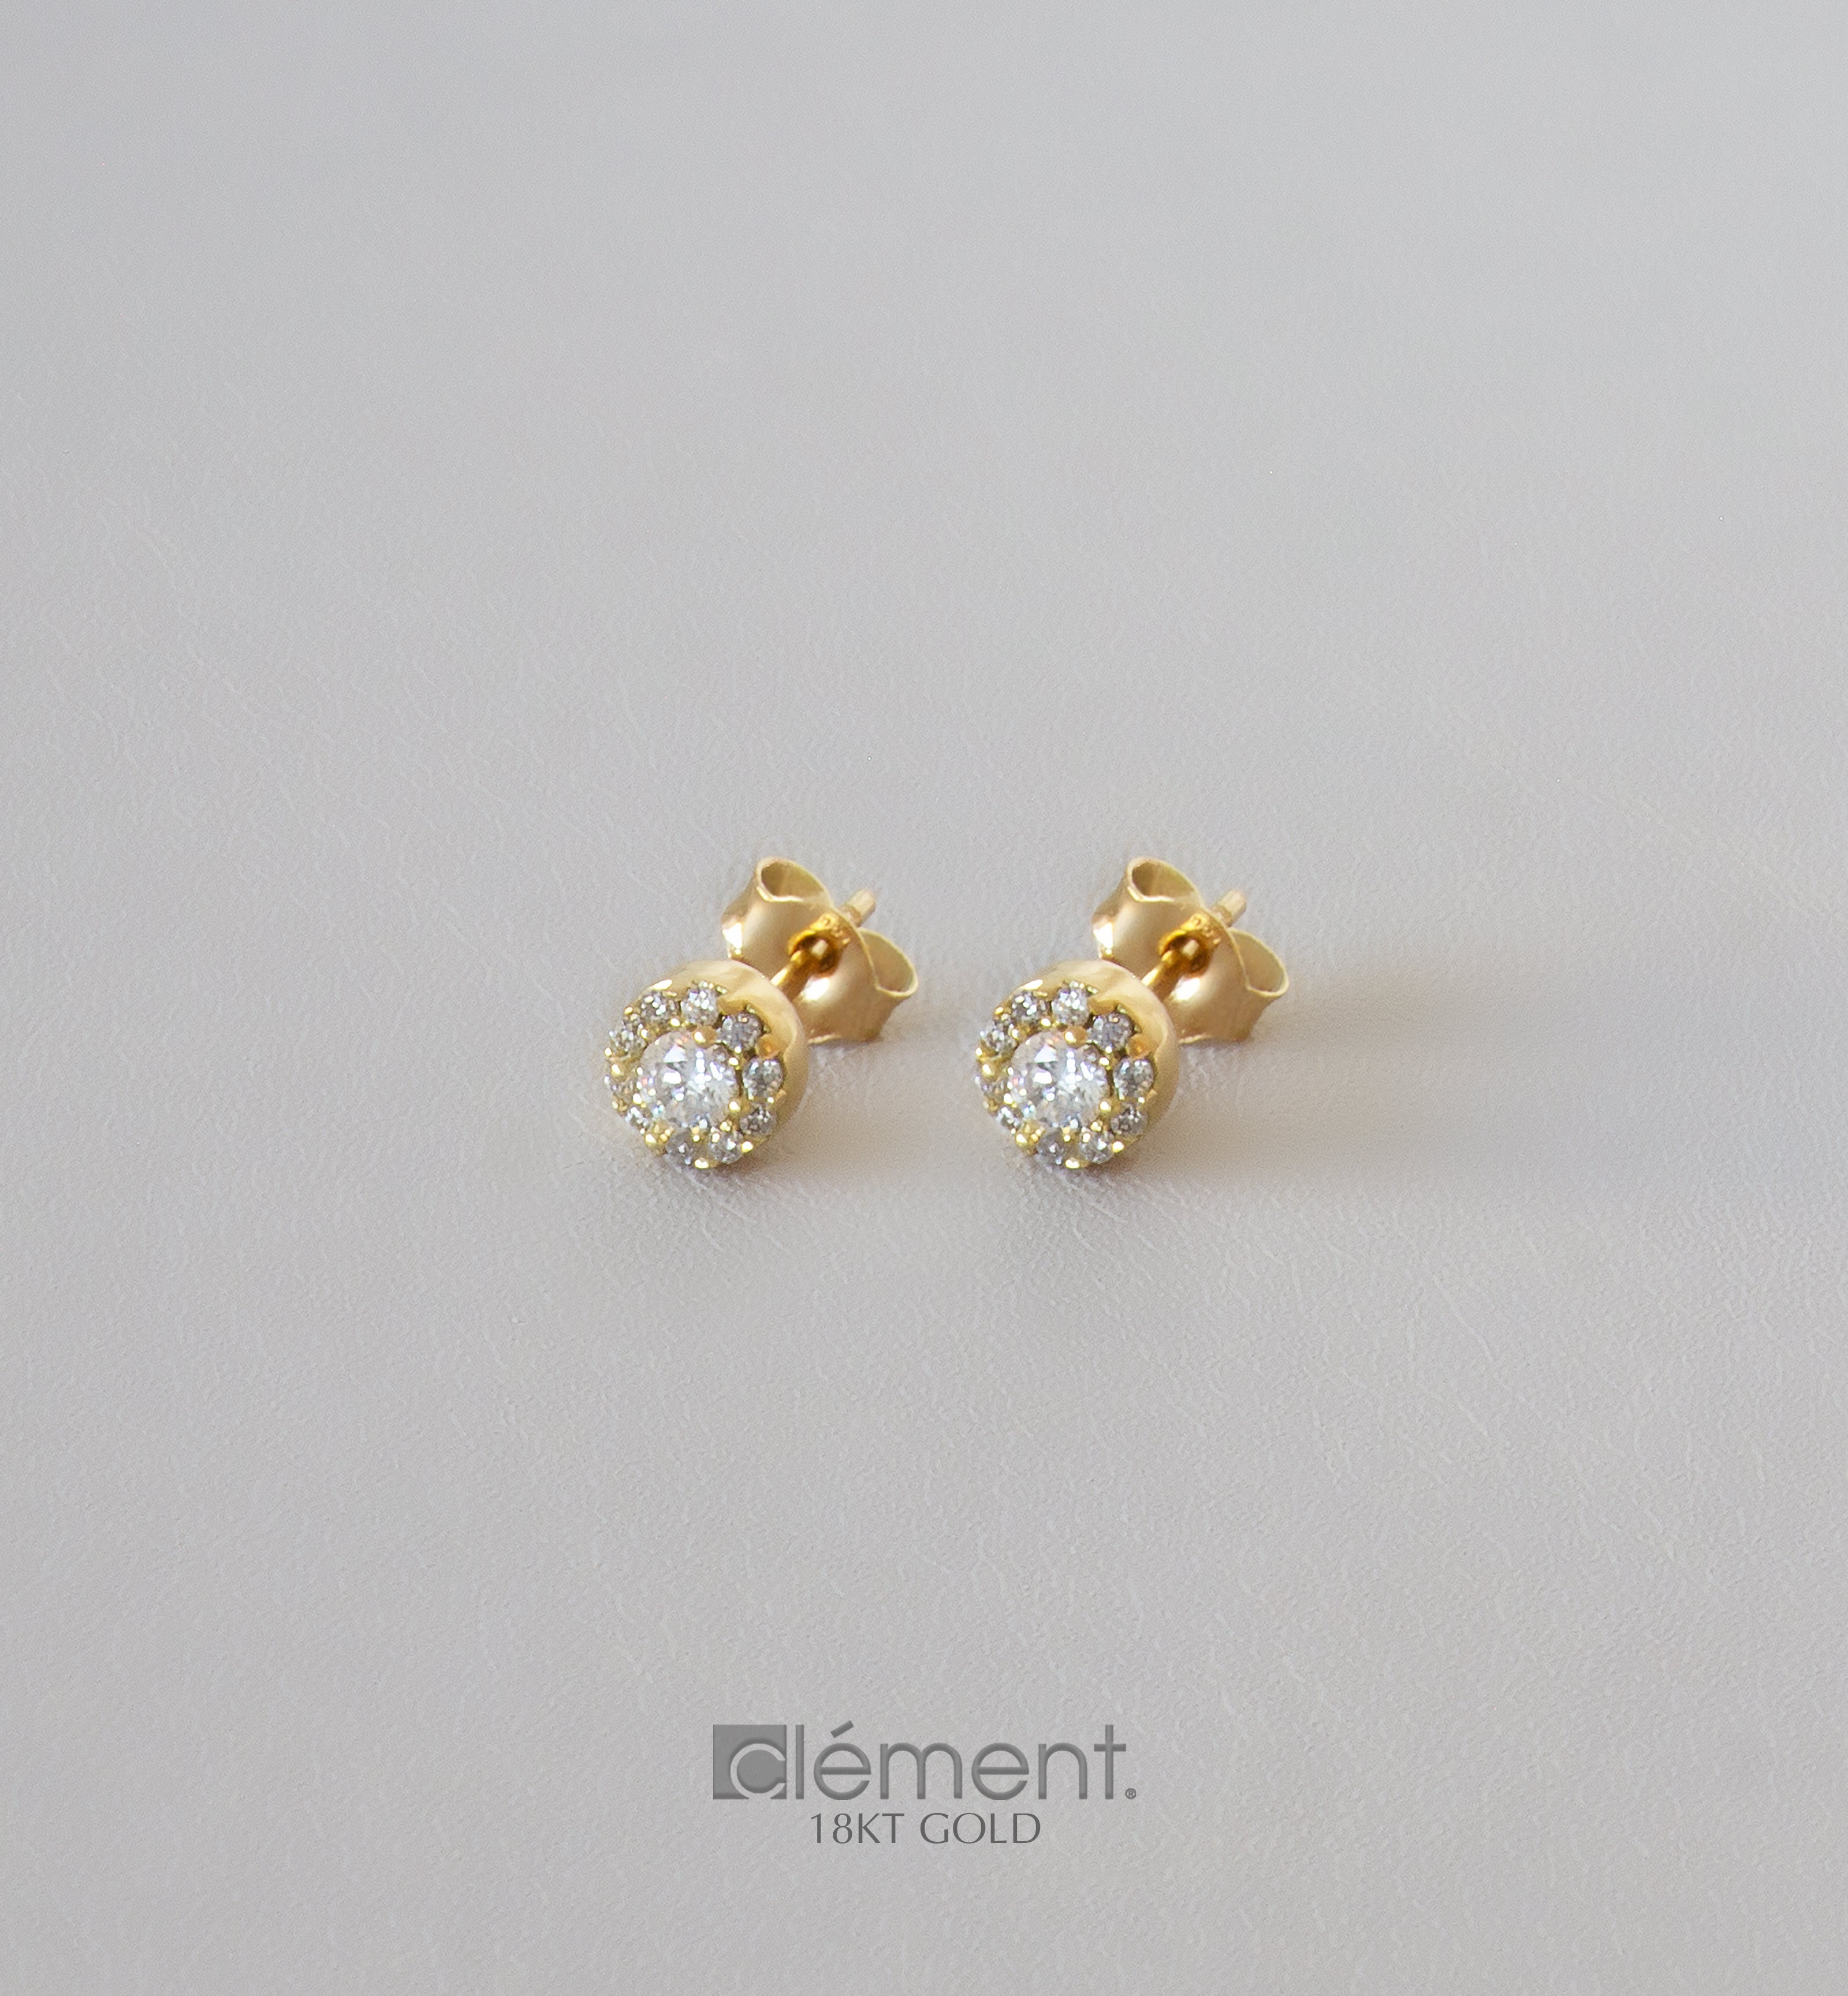 18ct Gold Solitaire Earrings with CZ Stones